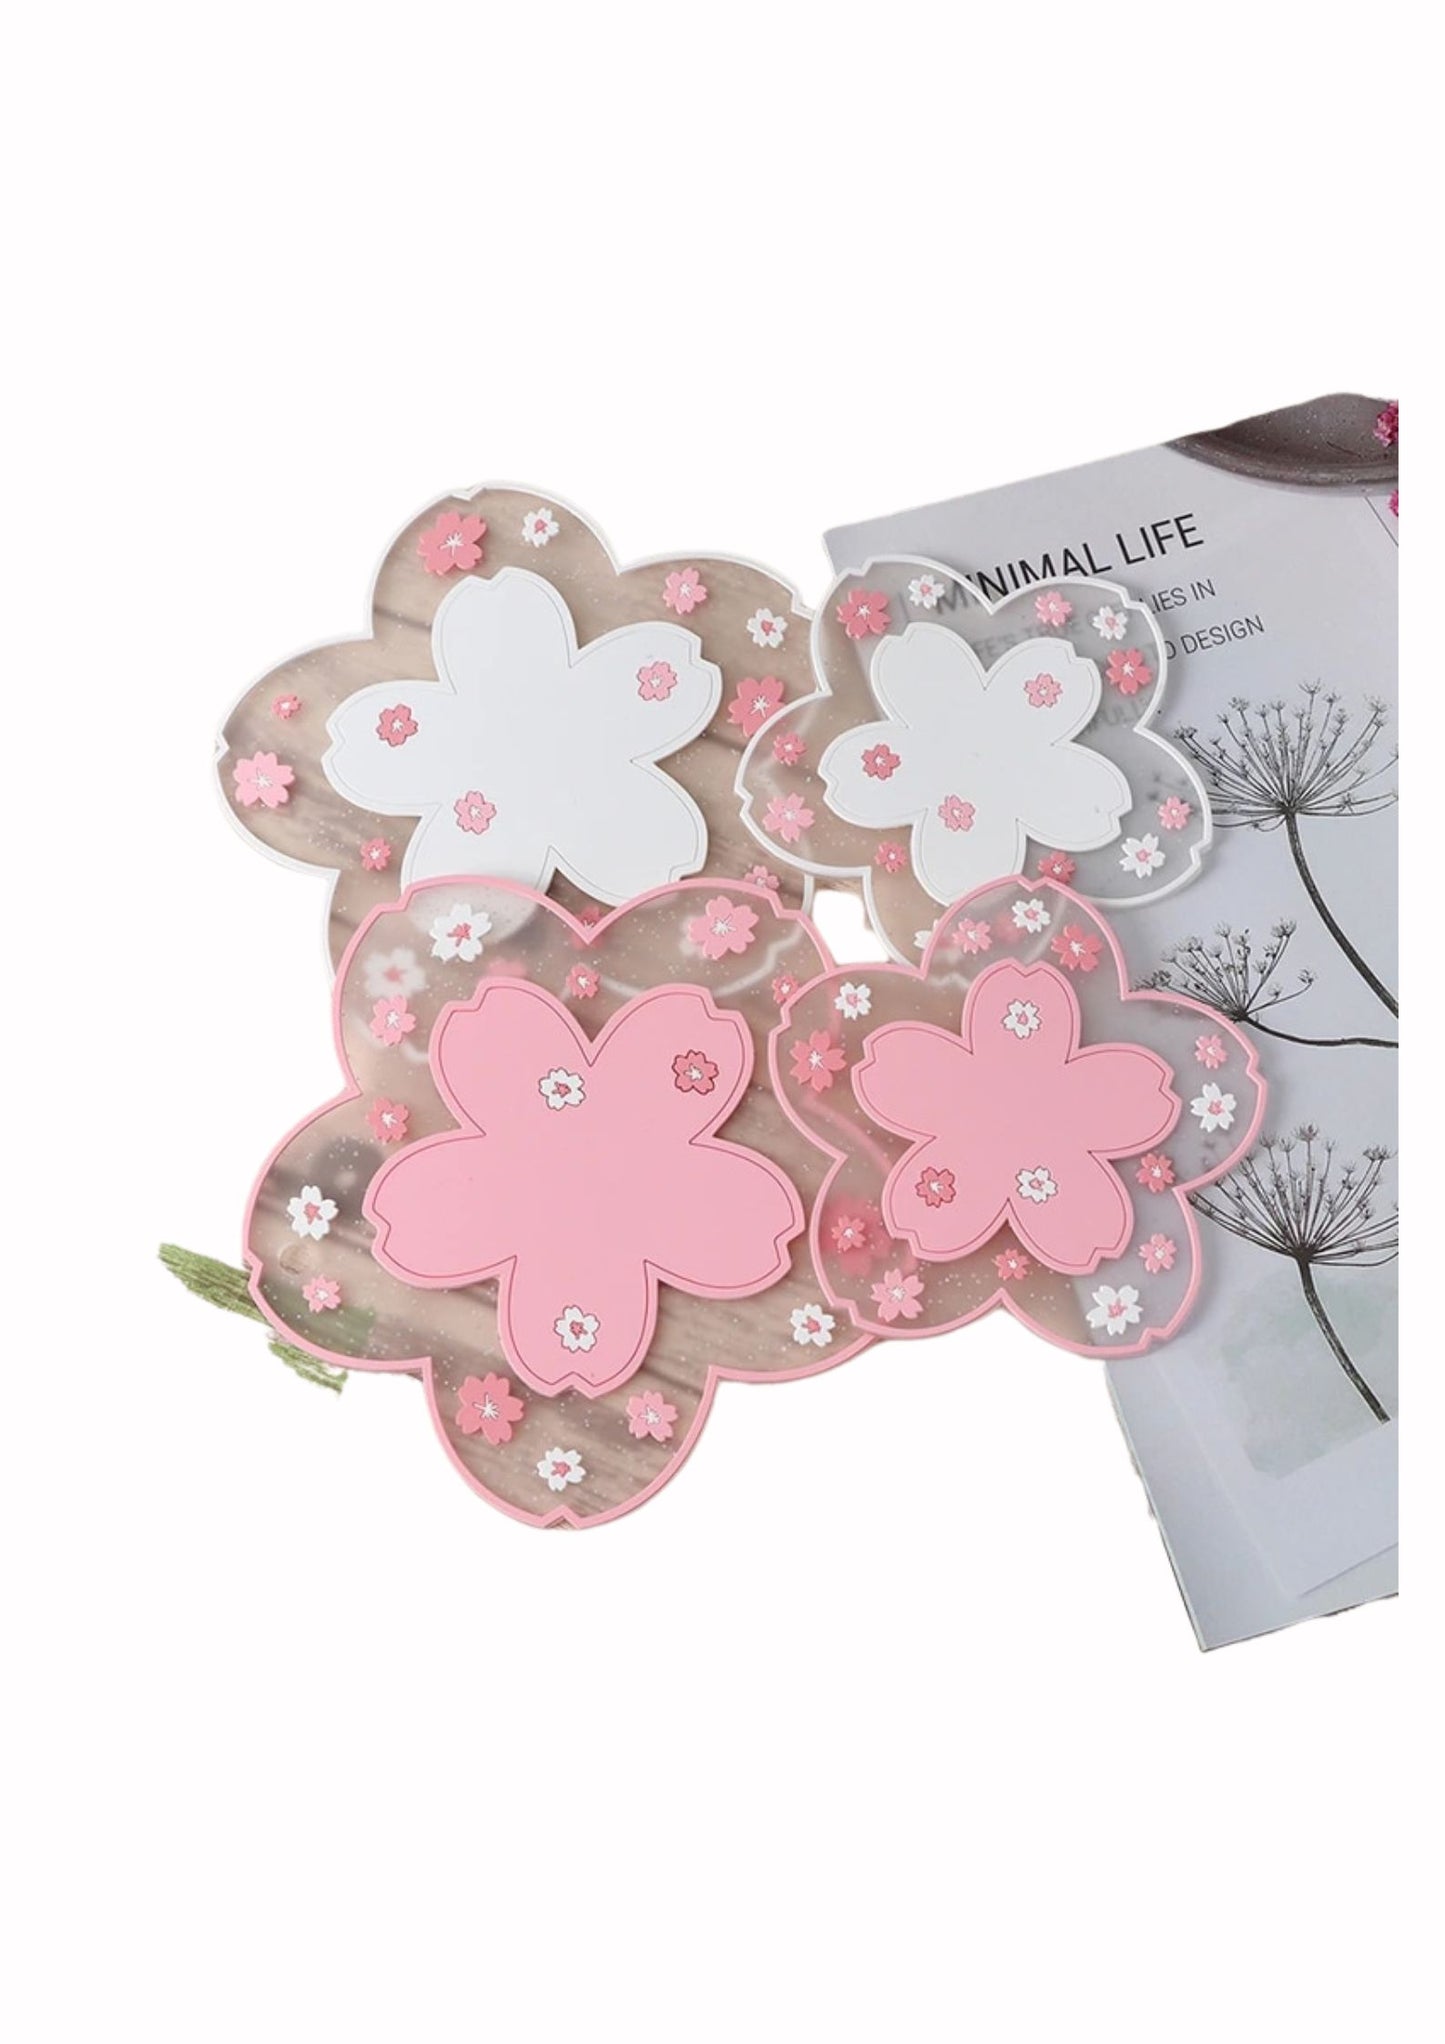 4 Table coasters- White and Pink